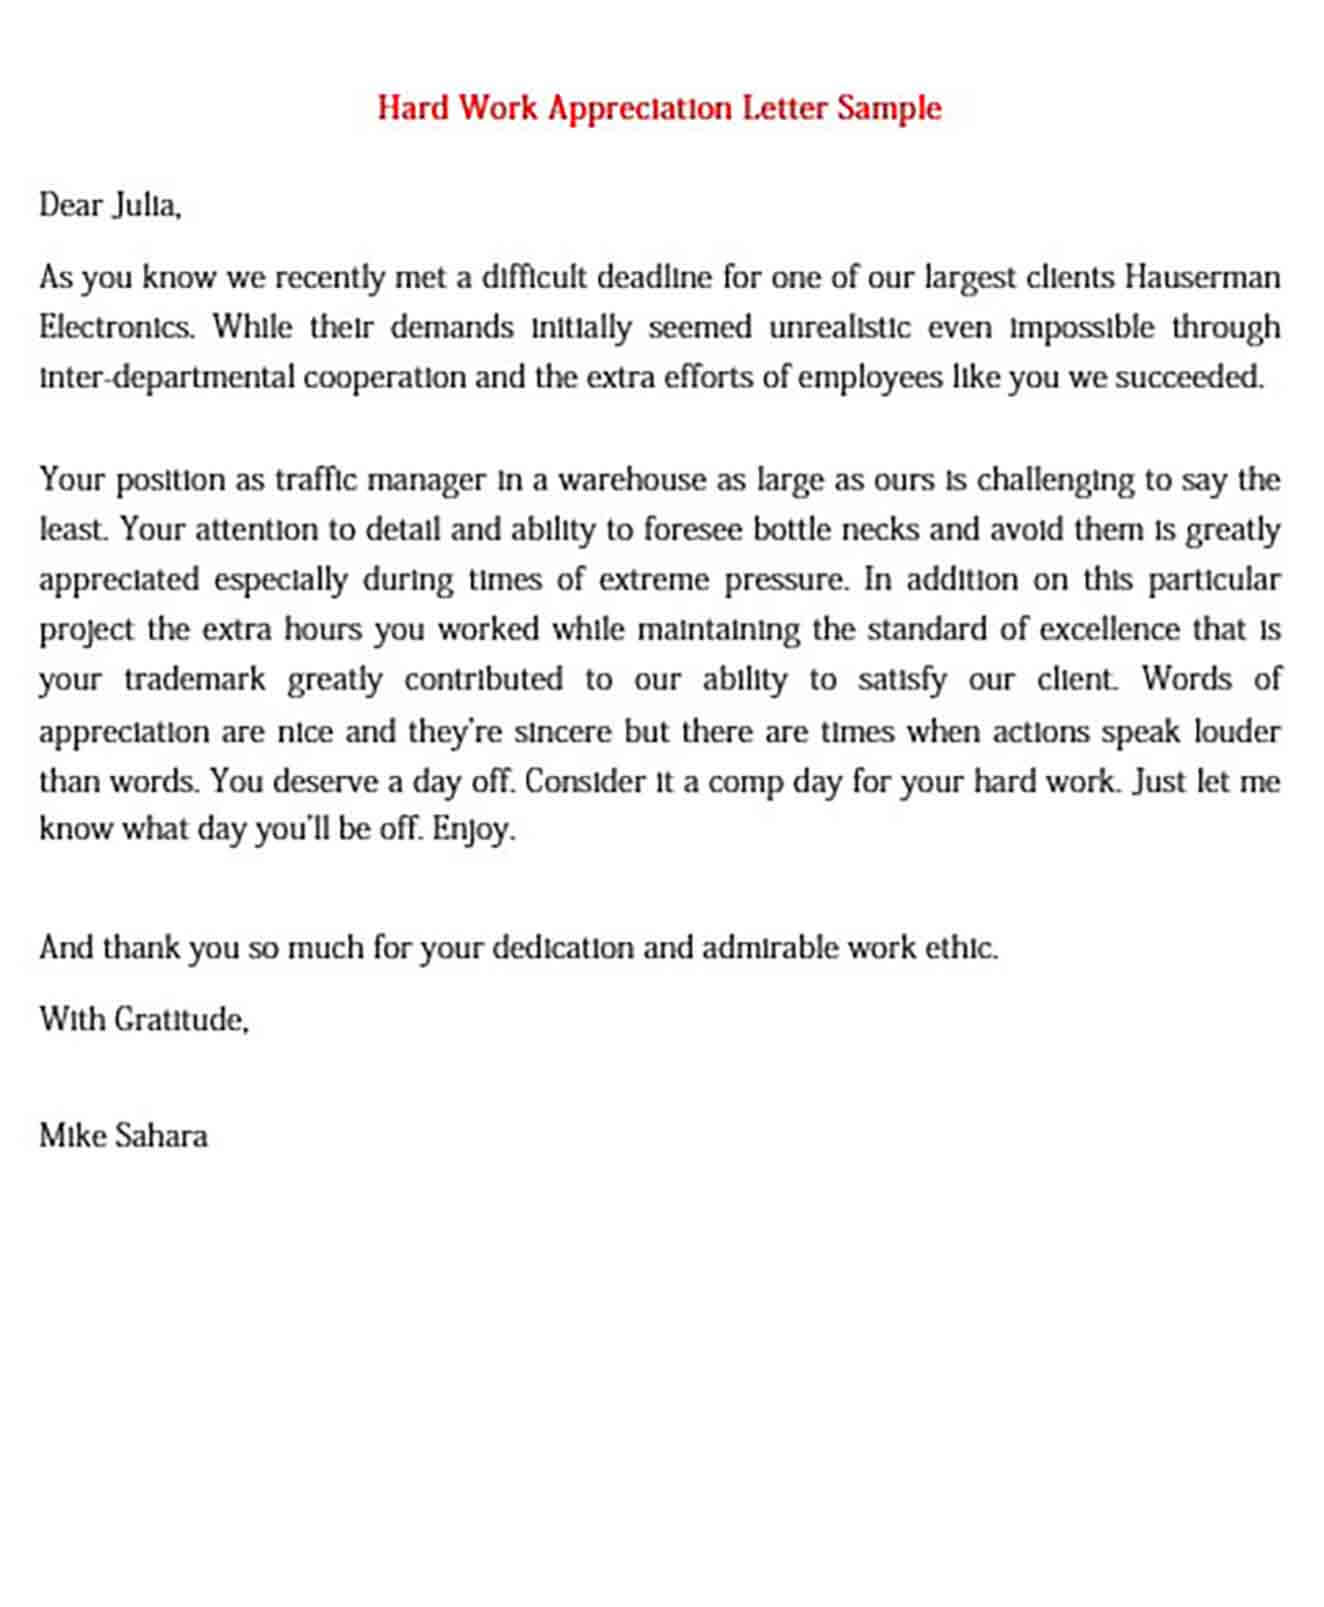 Sample Appreciation Letter To Employee For Hard Work from moussyusa.com